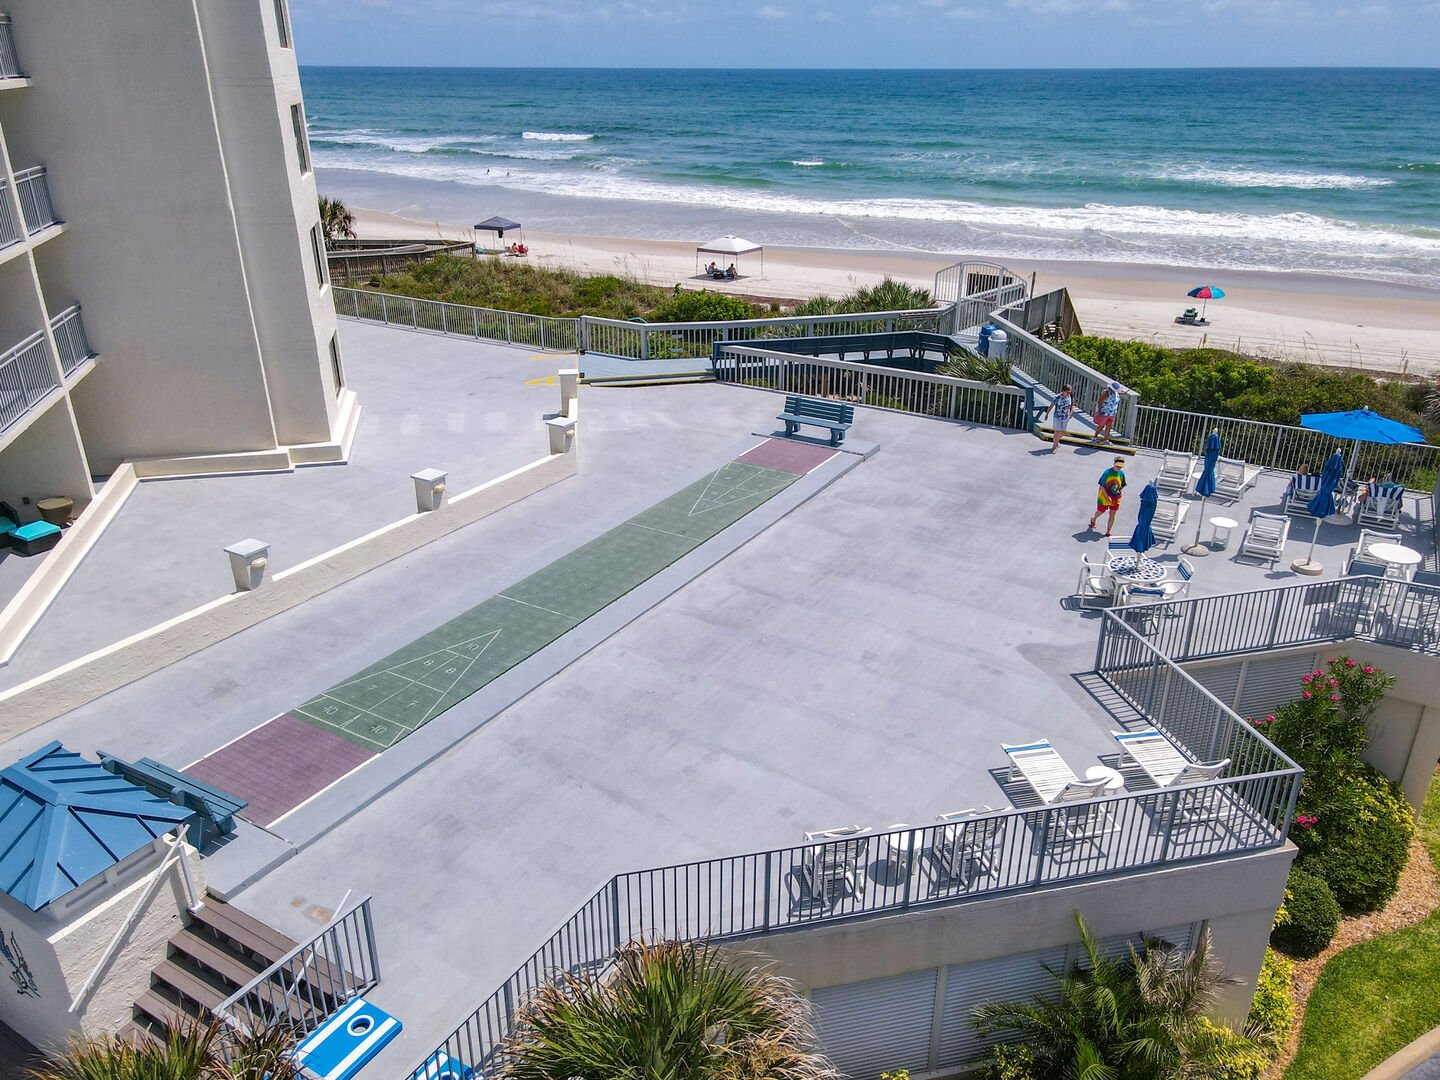 Sun deck, outdoor shuffleboard courts and cornhole game area all can be enjoyed while taking in the oceanfront views!  All steps from the Seascape Towers ground level patio!